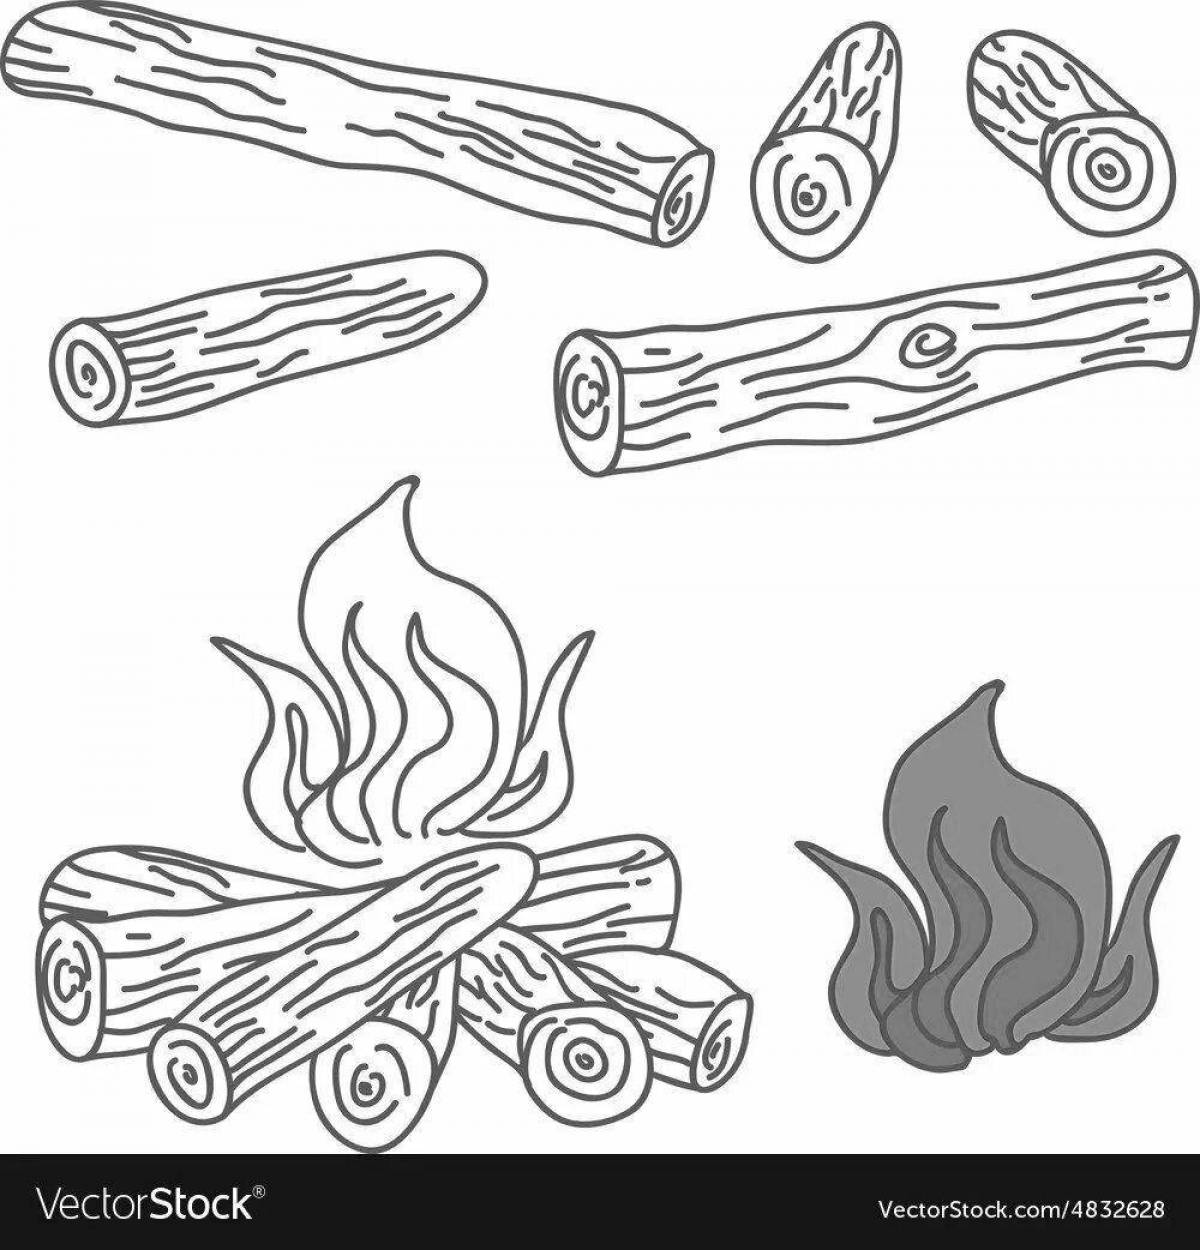 Inspiring firewood coloring book for kids